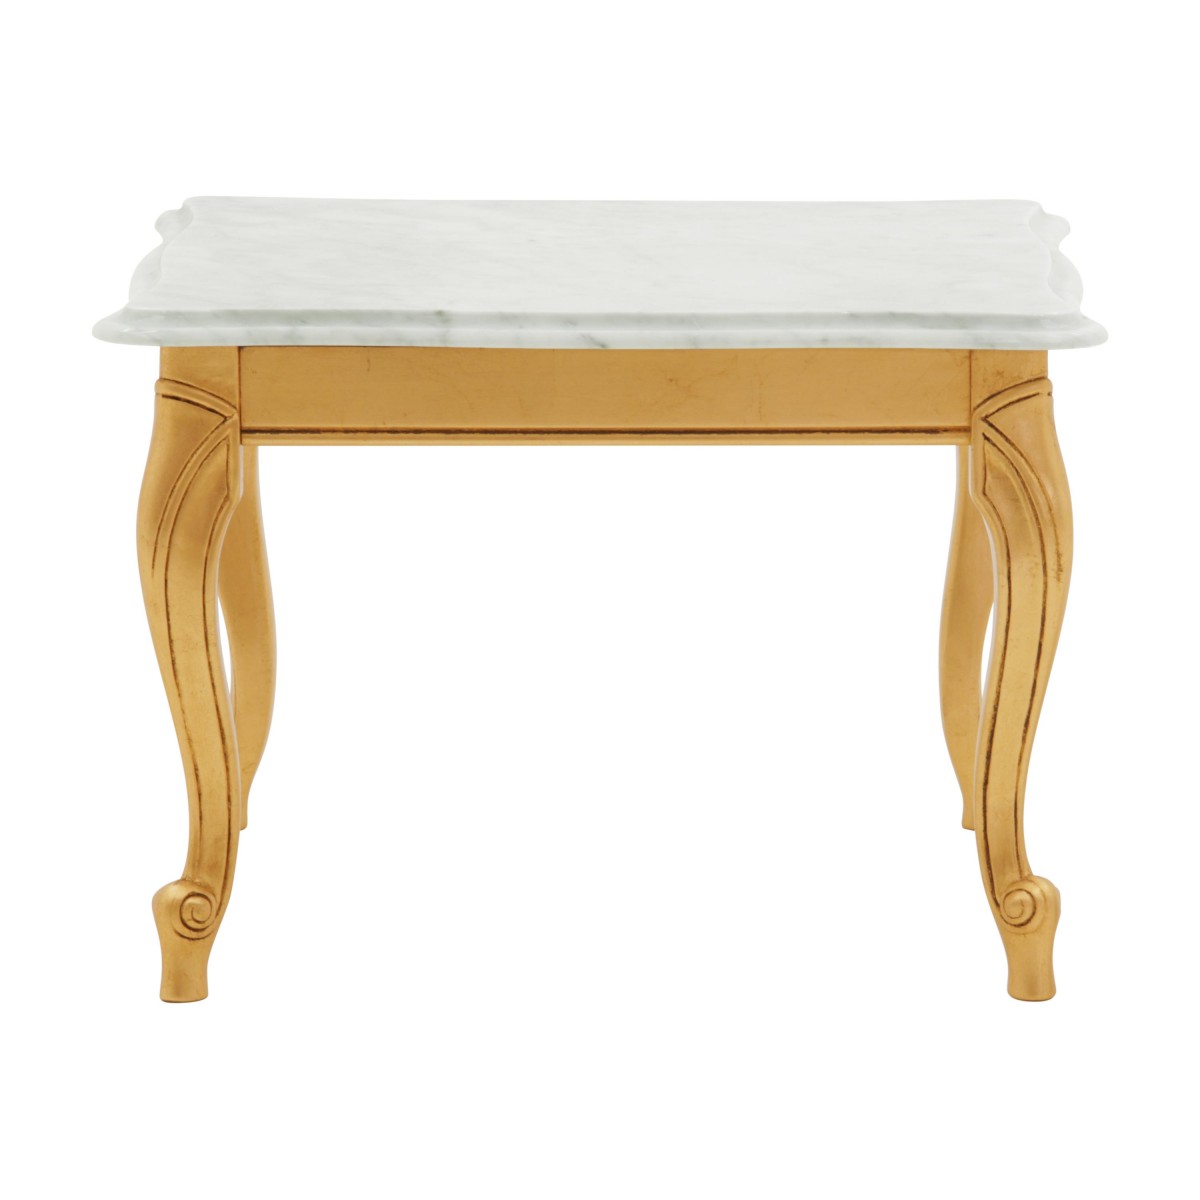 classic small square wooden table